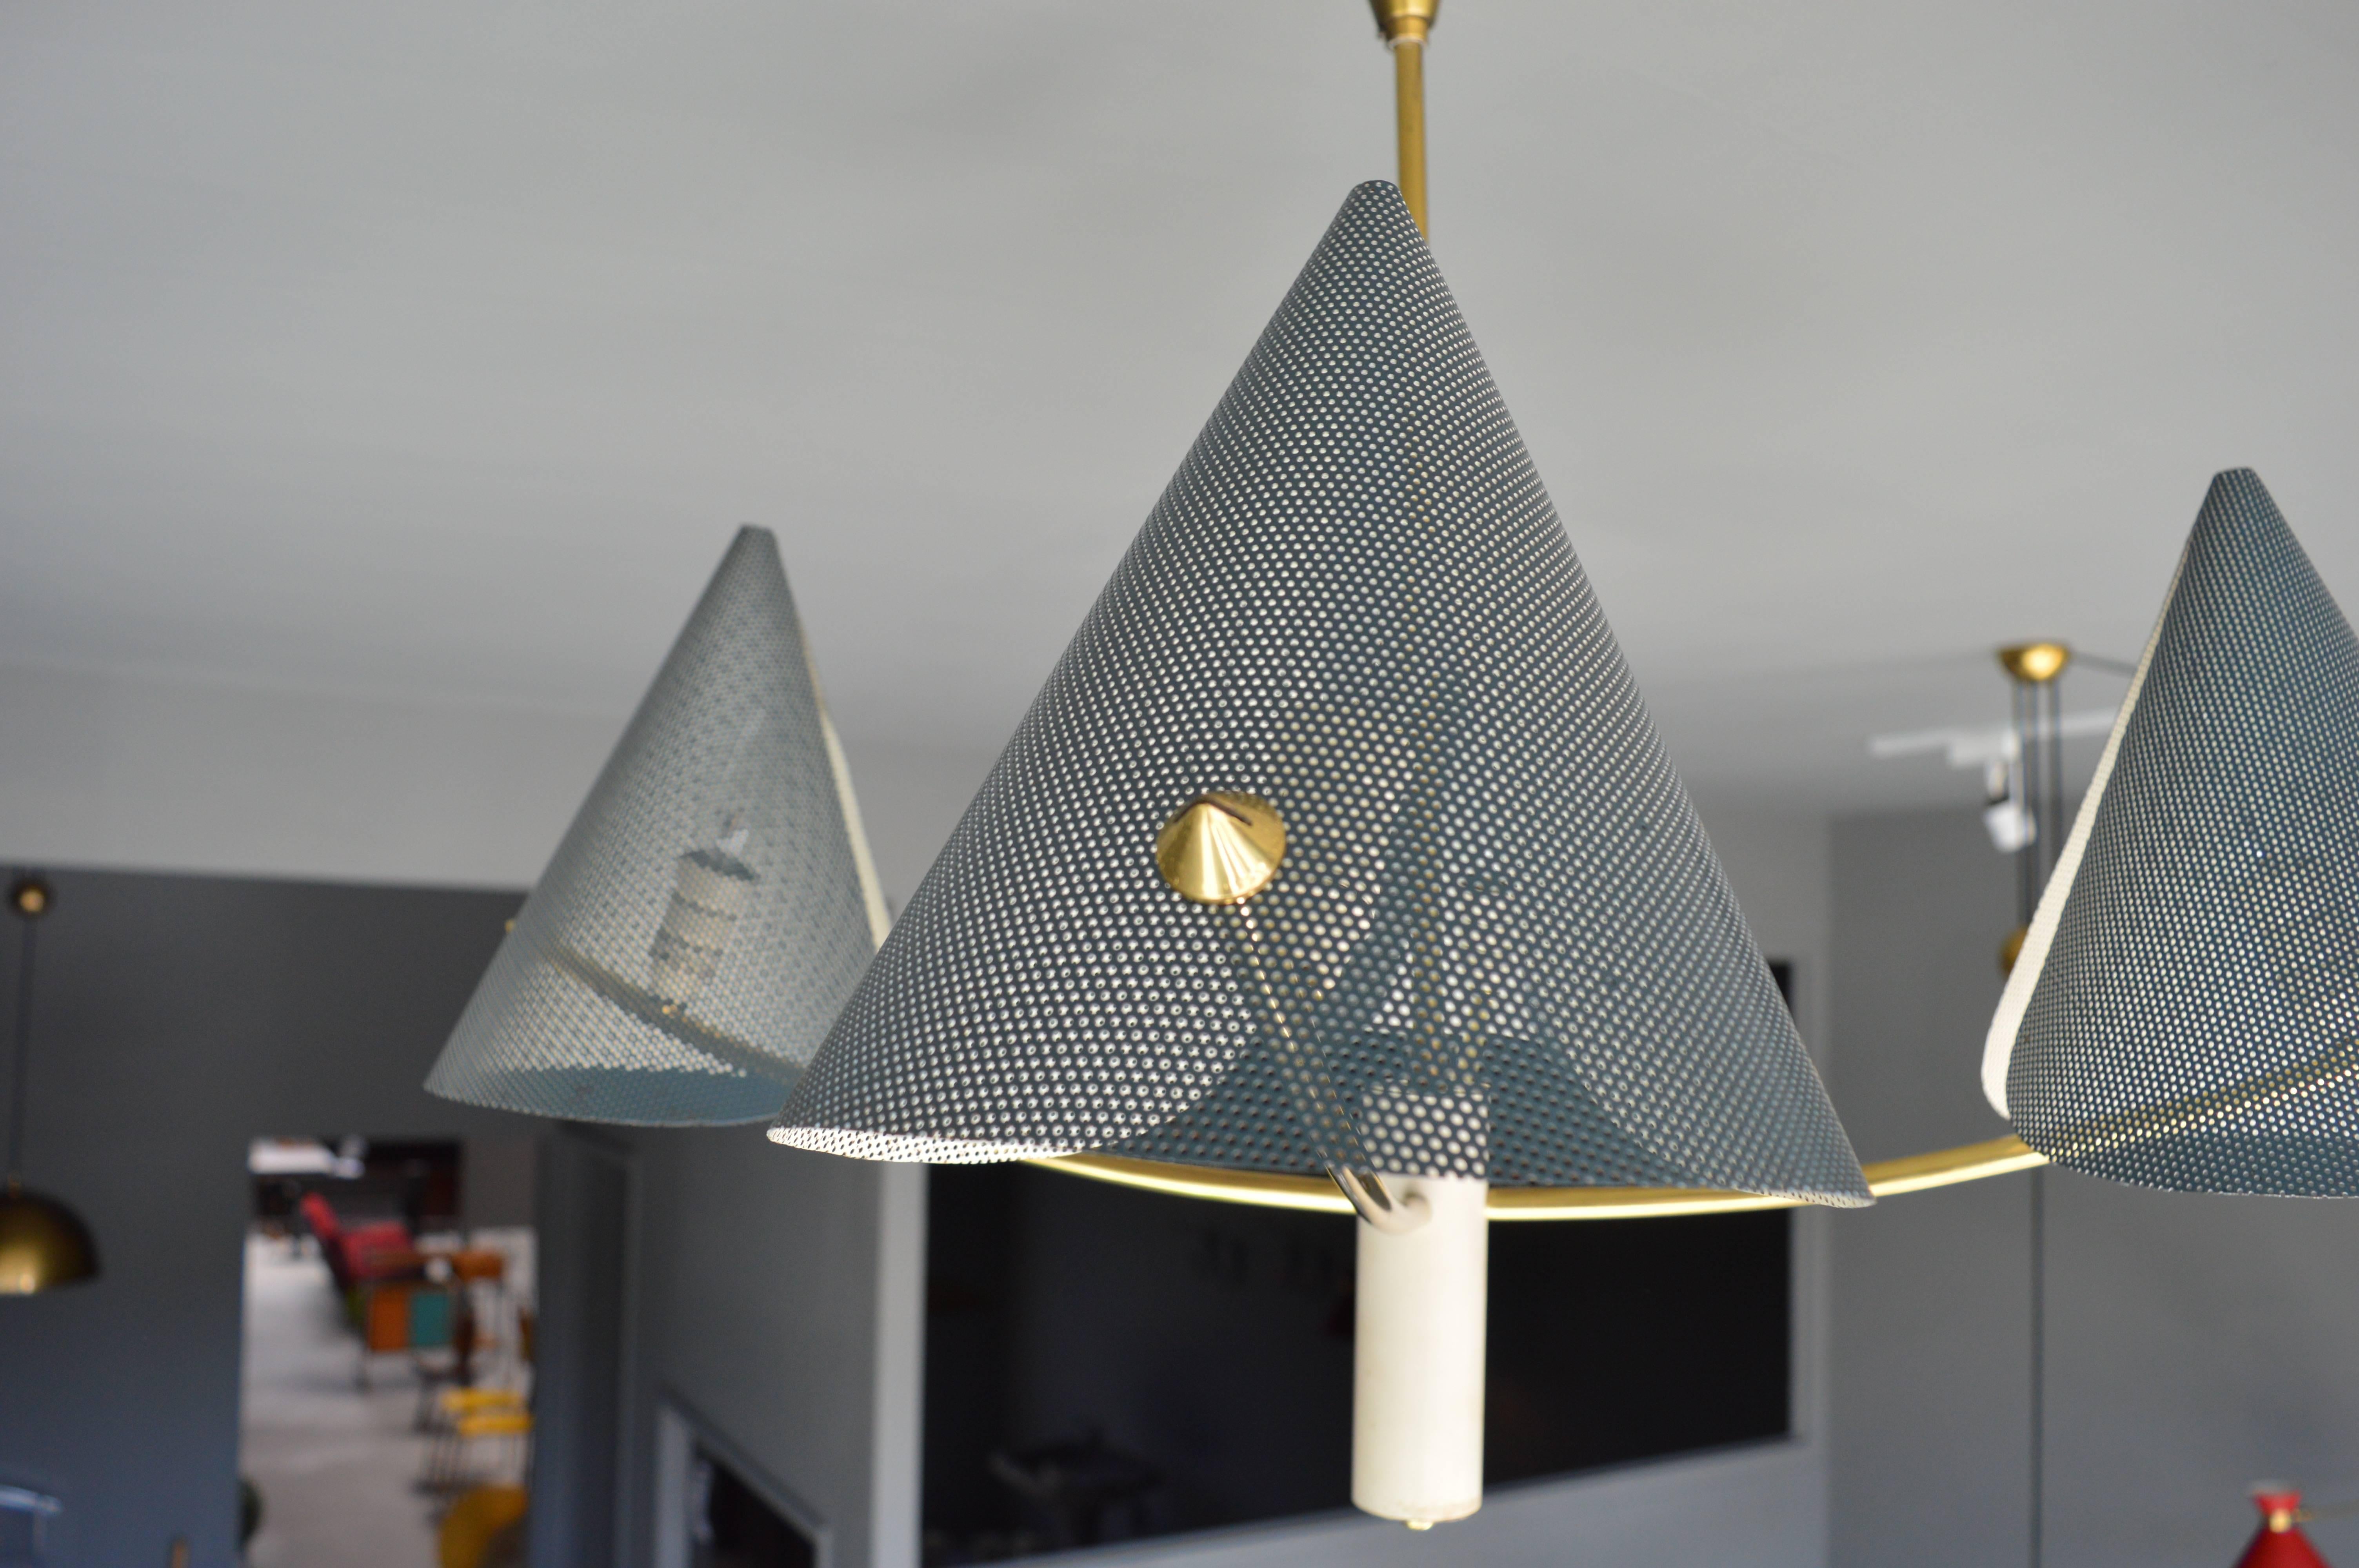 Gorgeous chandelier in the style of French designer Mathieu Matégot. Brass frame and hardware with blue perforated metal cone shades. Excellent vintage condition. Great lines and perfect scale. Chandelier looks amazing both on and off!